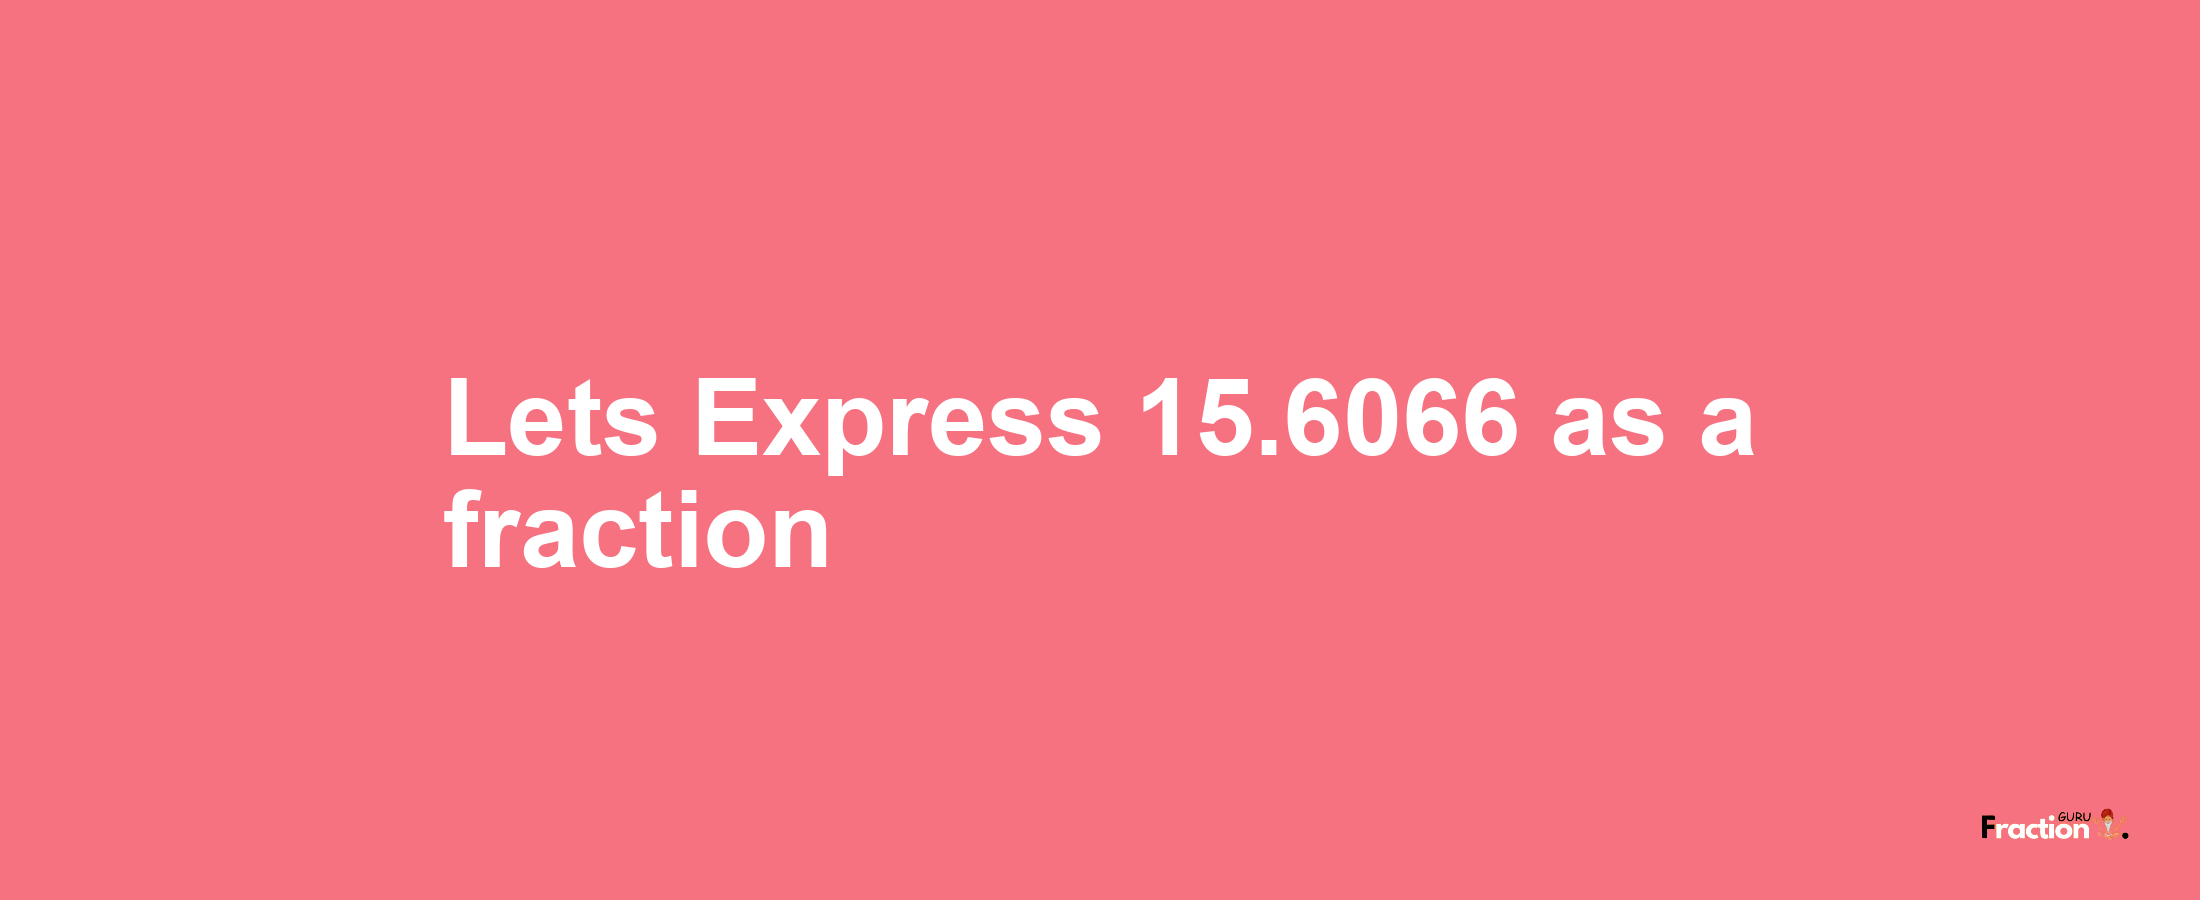 Lets Express 15.6066 as afraction